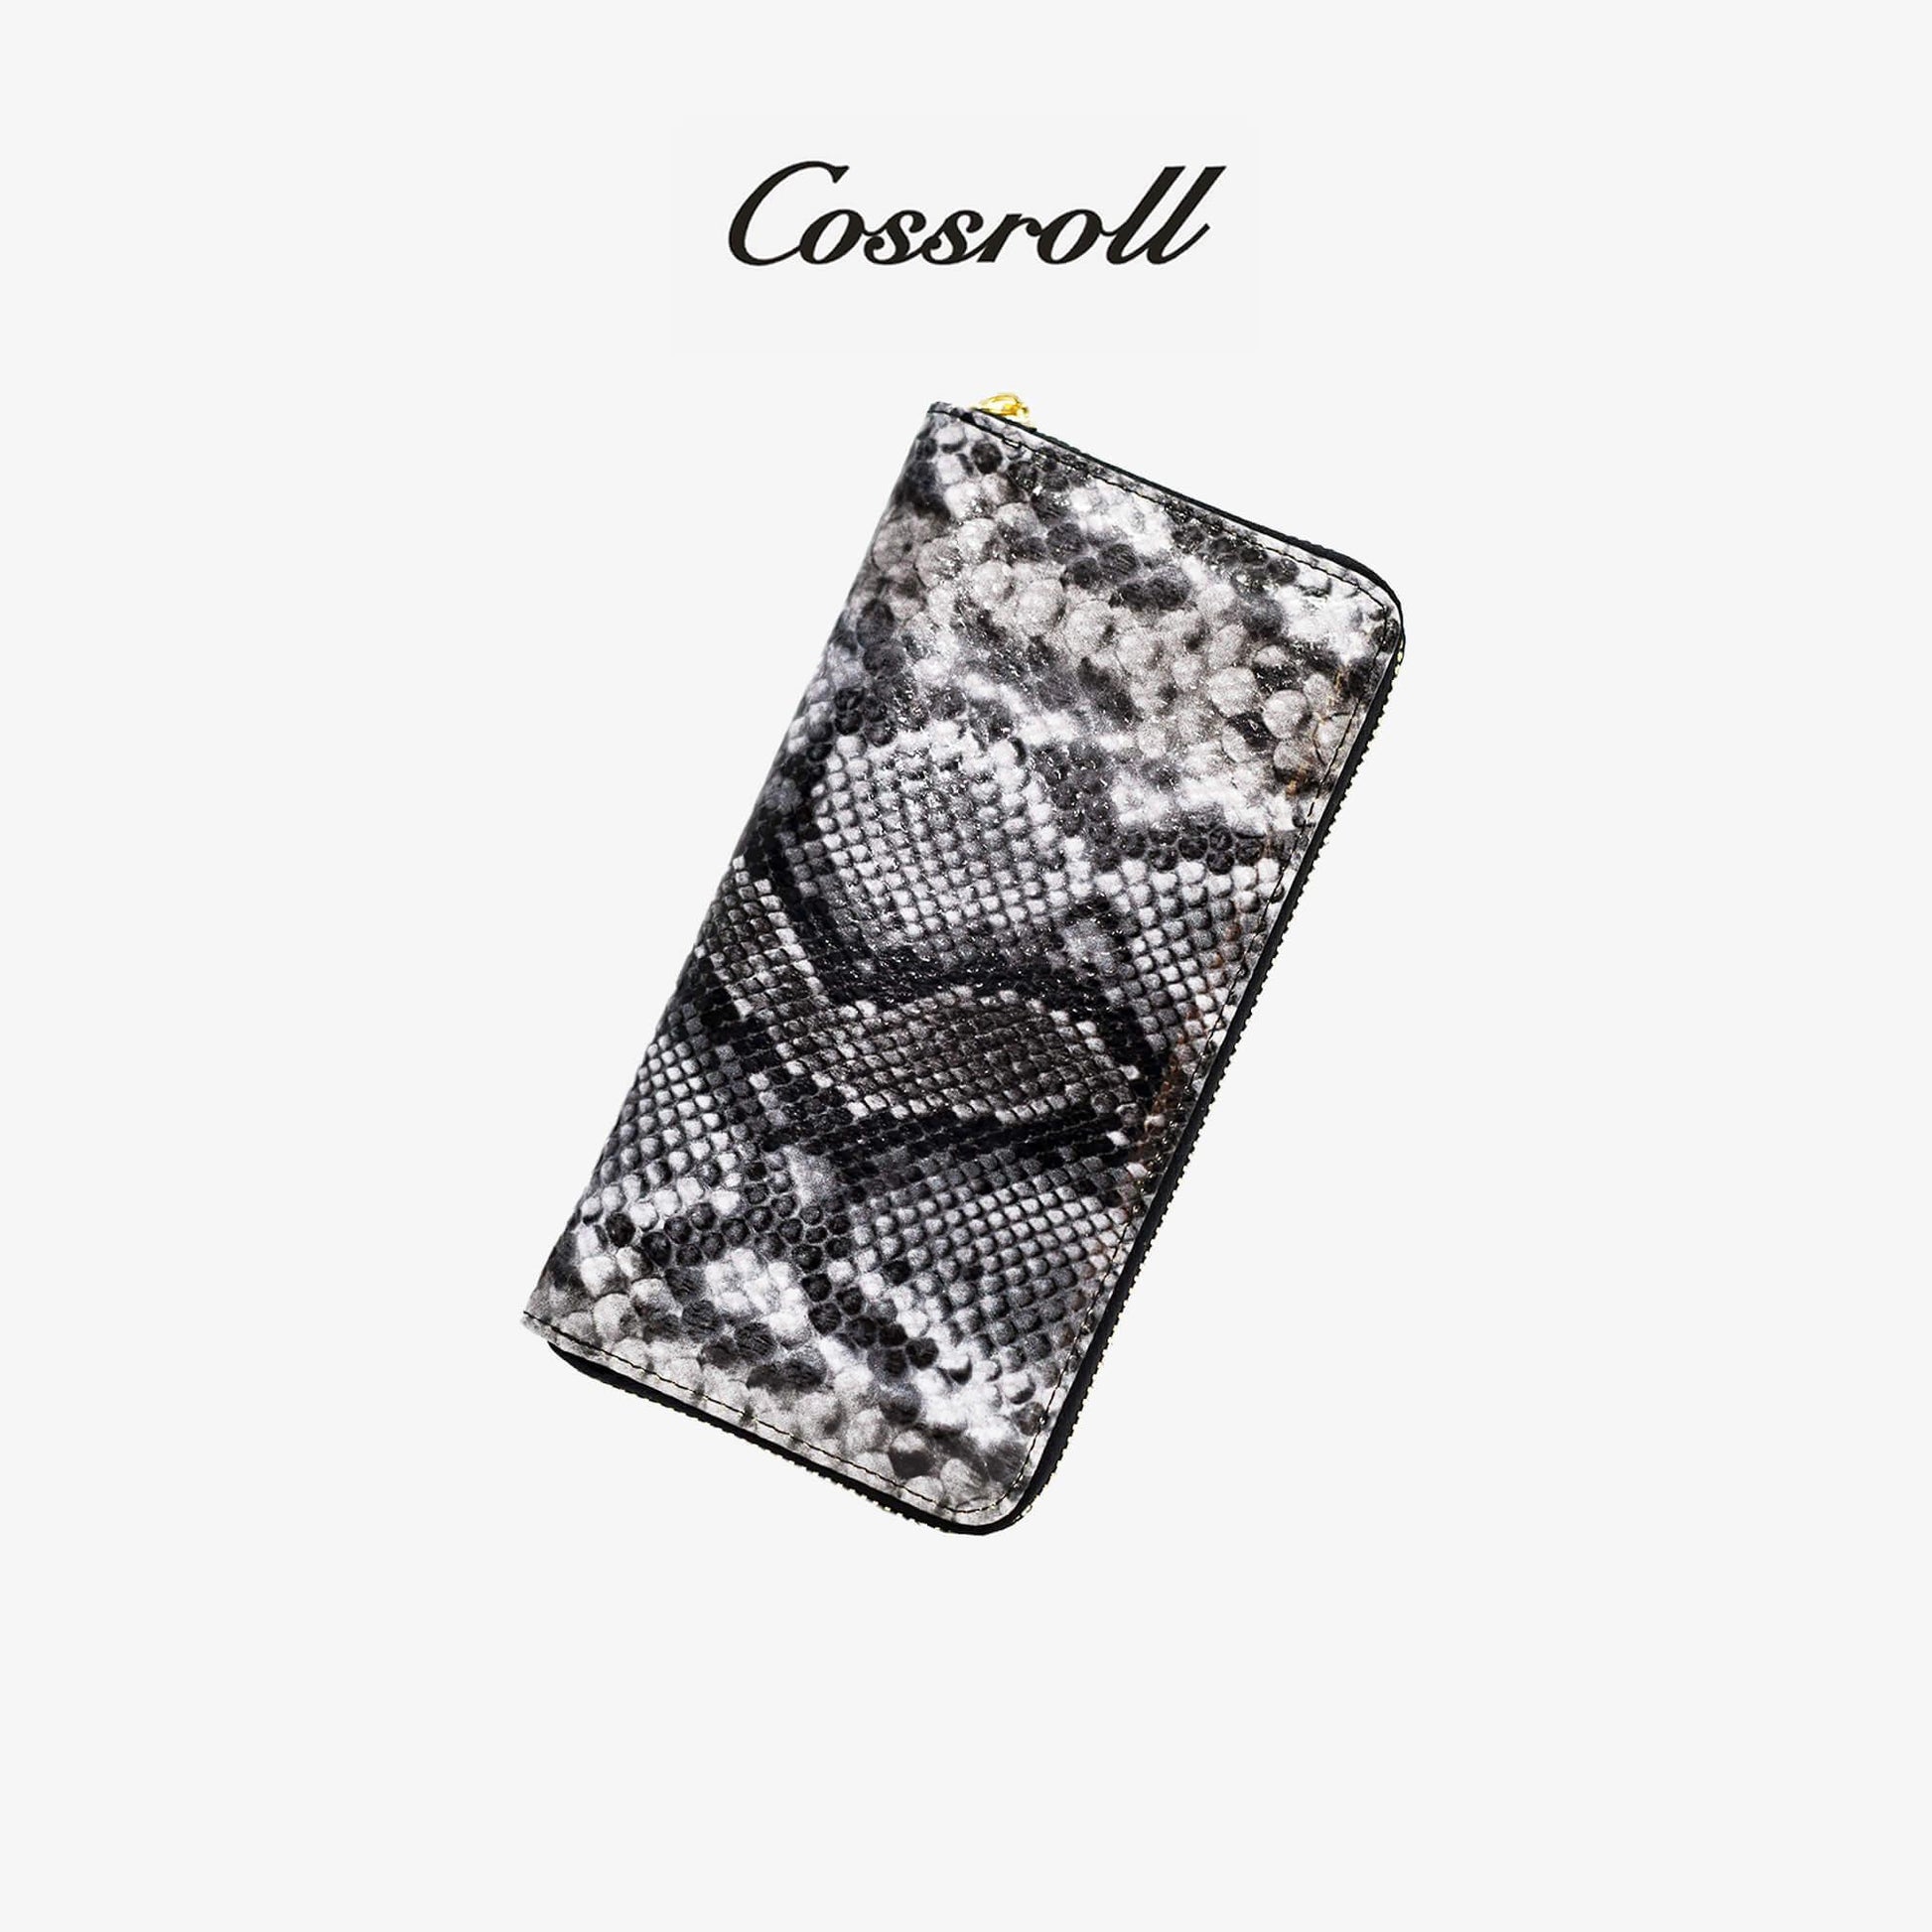 Ladies Python Zipper Leather Wallets - cossroll.leather